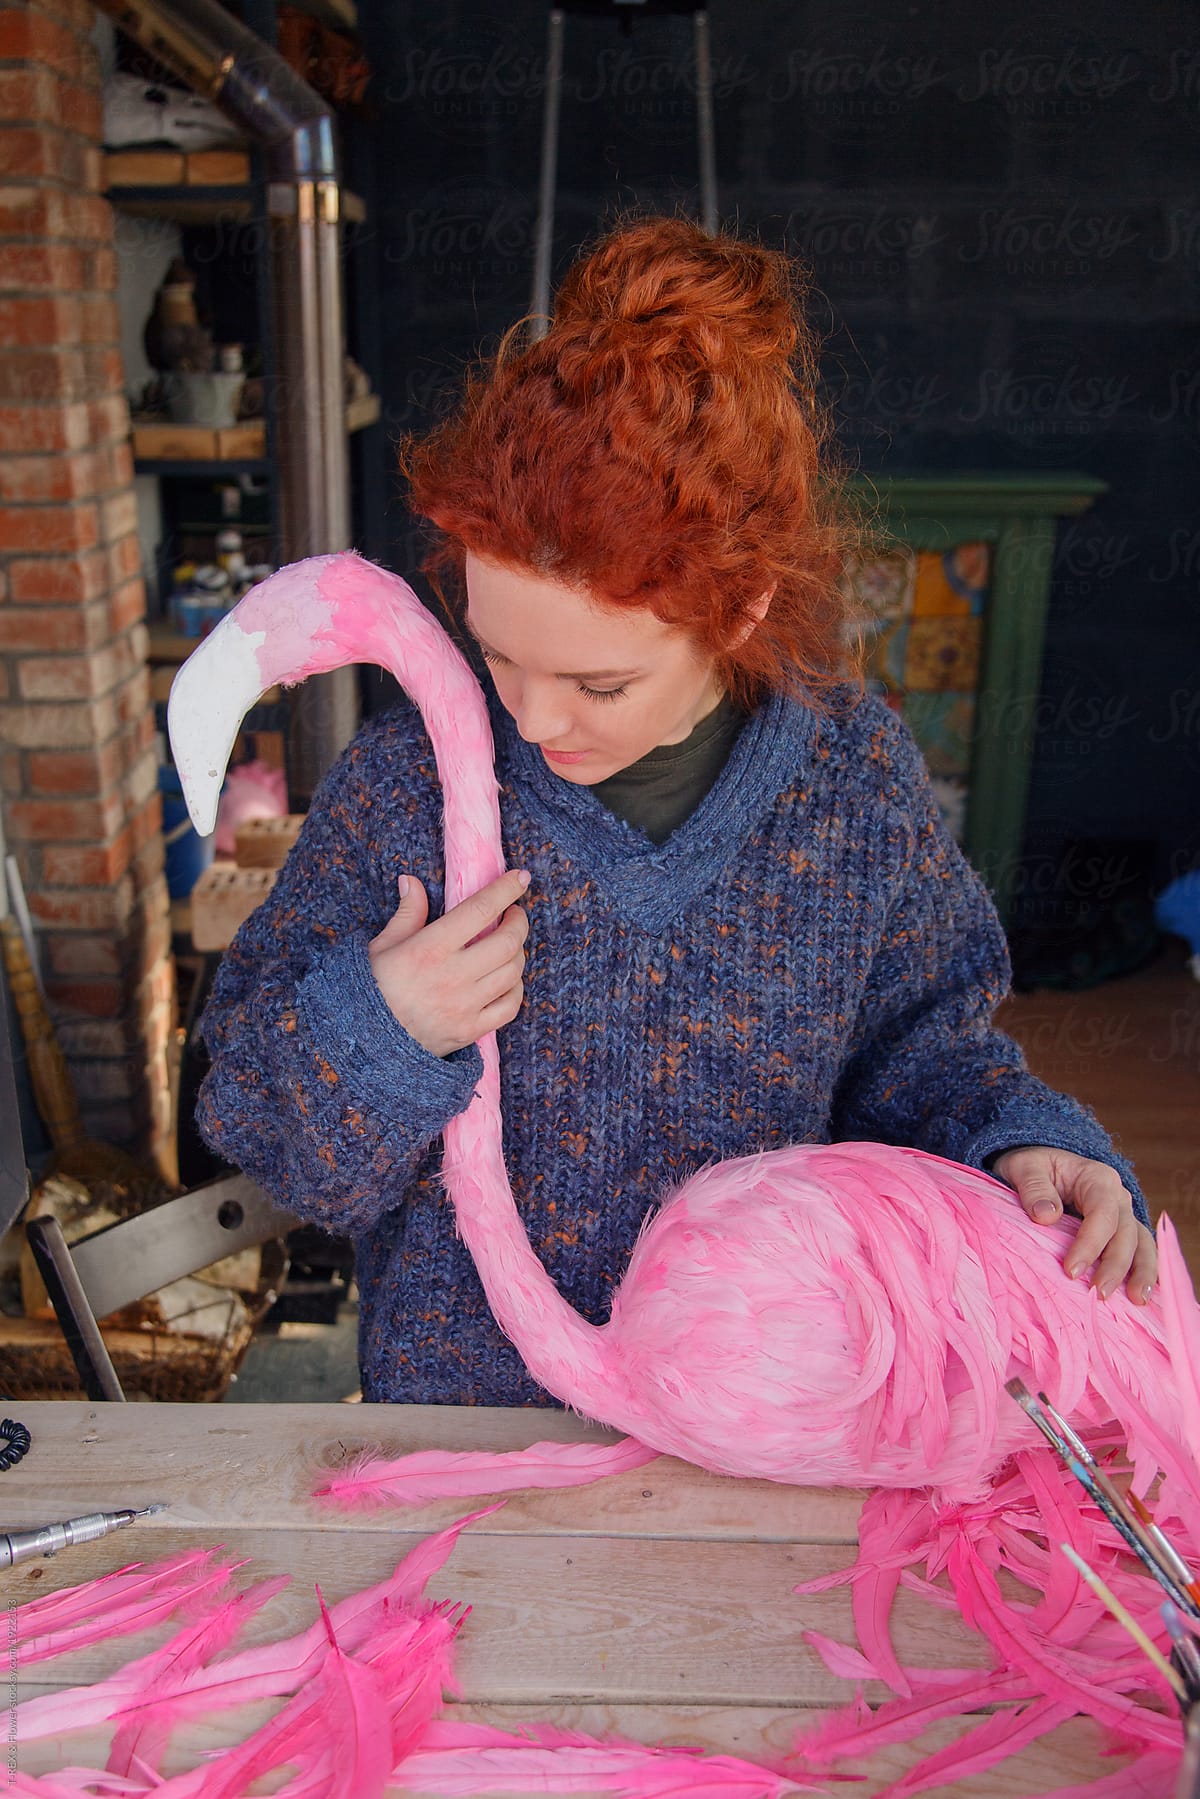 Woman designing flamingo with feathers